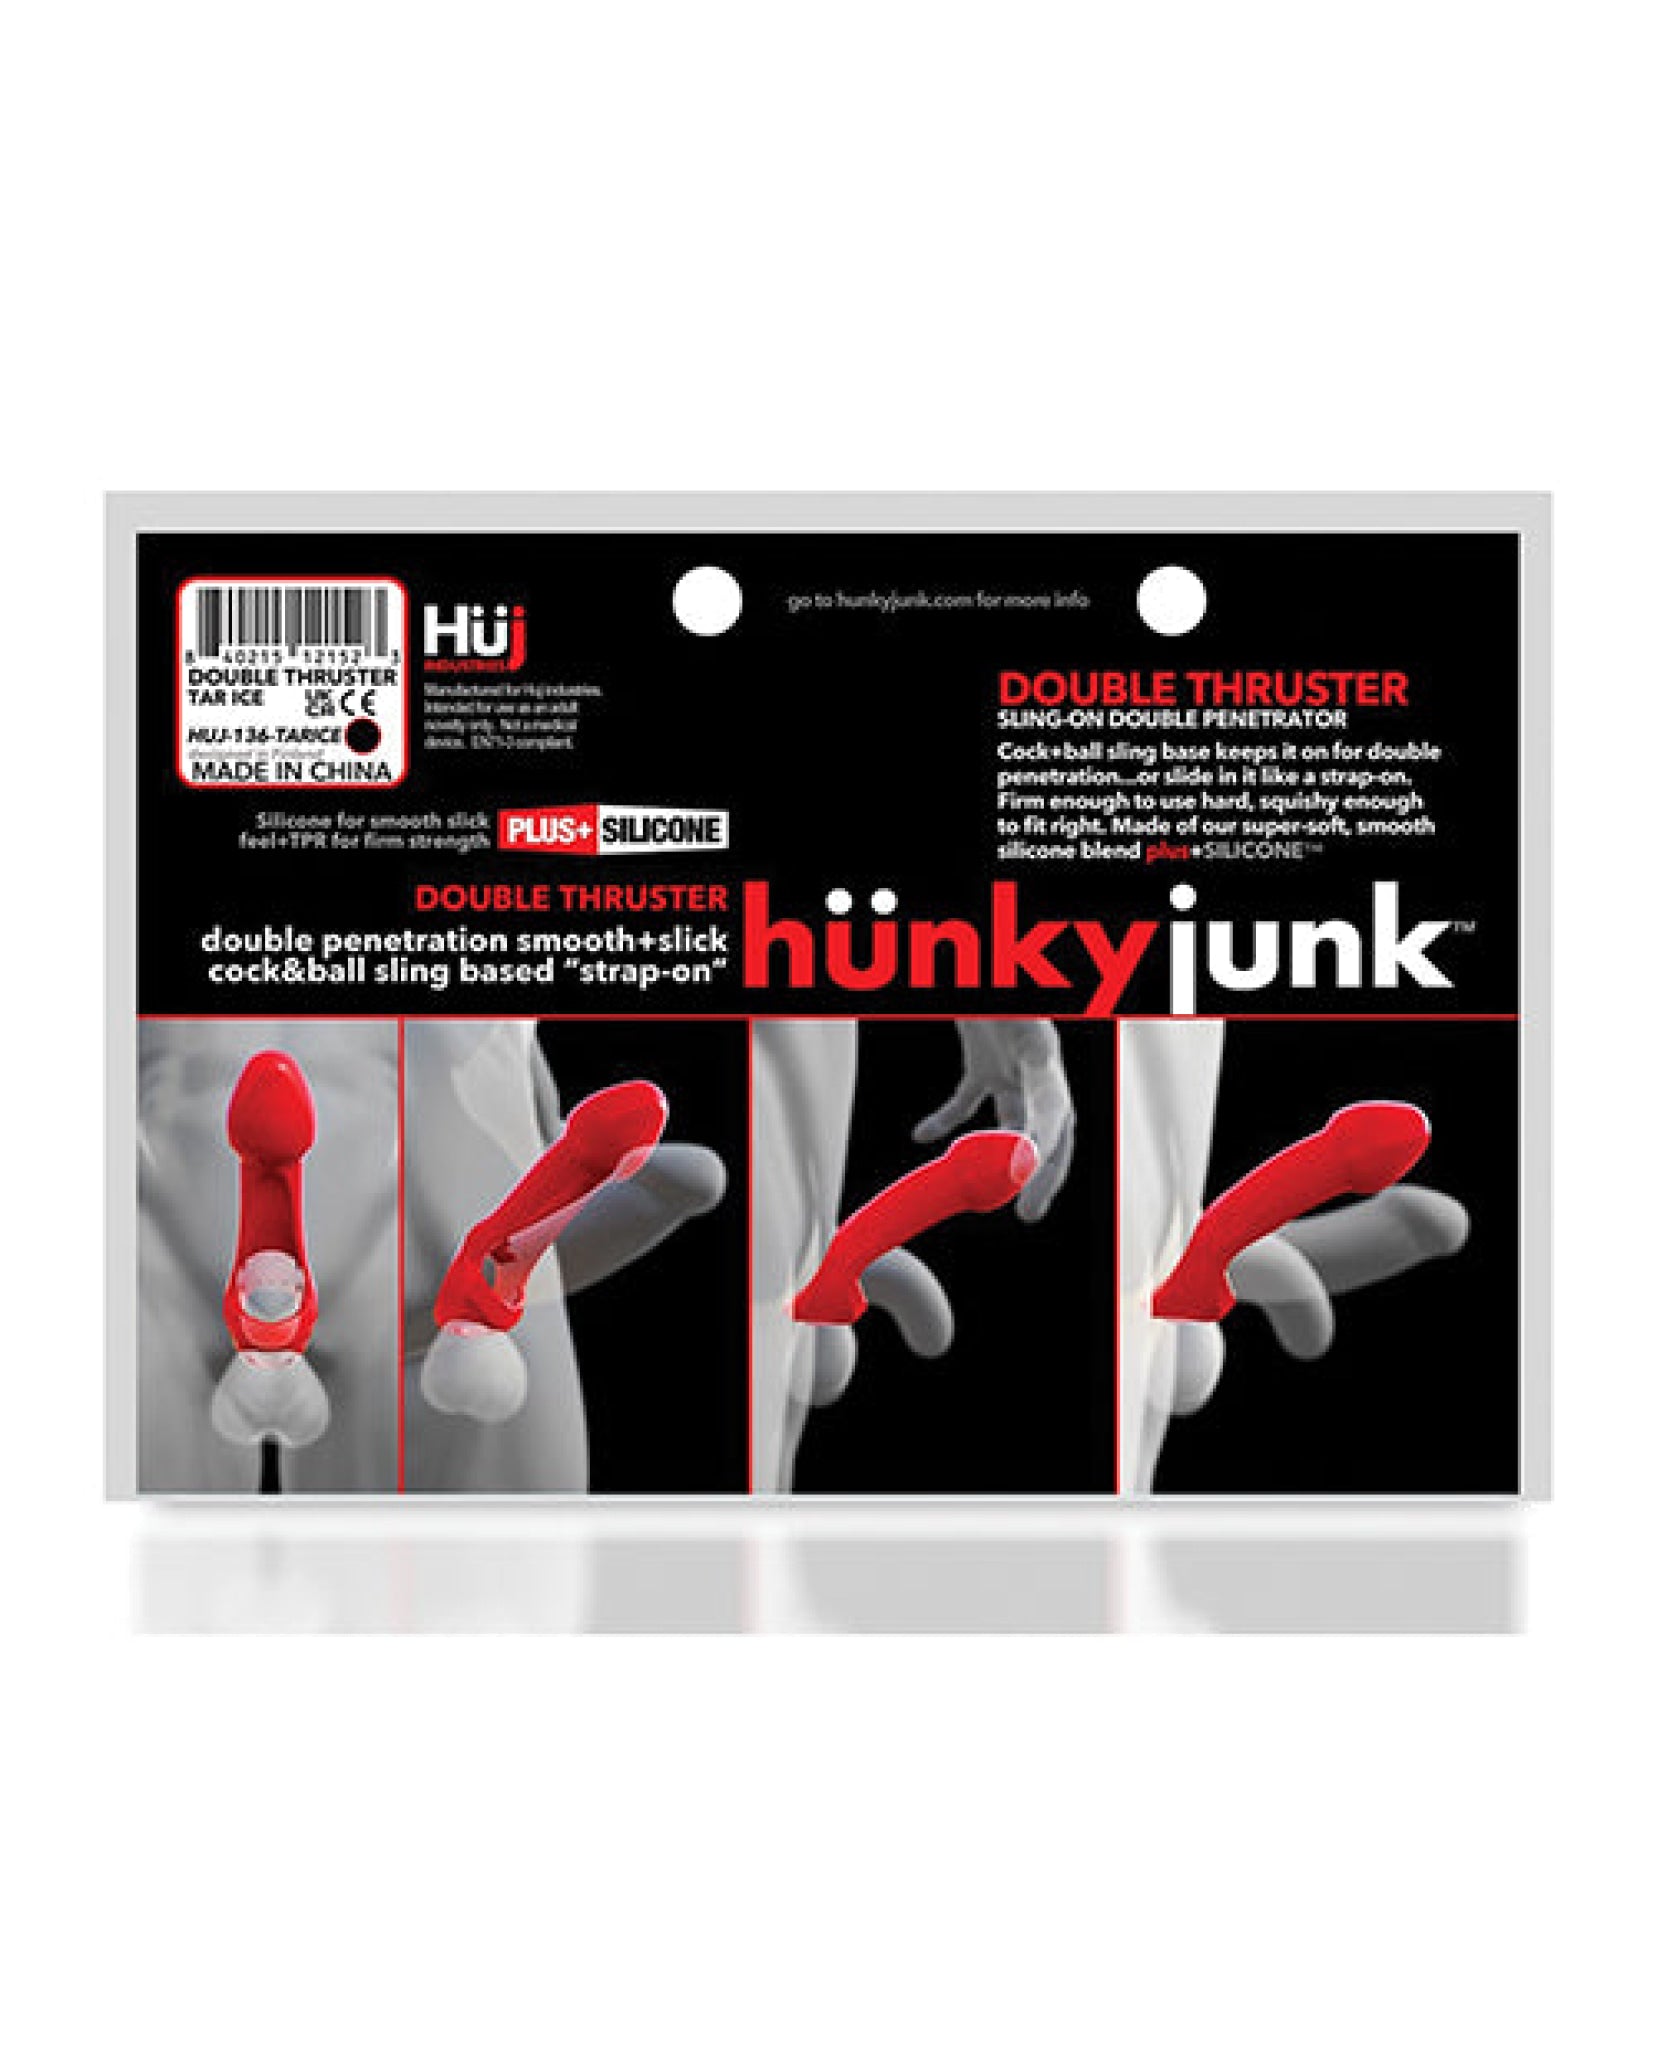 Hunky Junk Double Thruster Sling - Tar Ice Hunky Junk